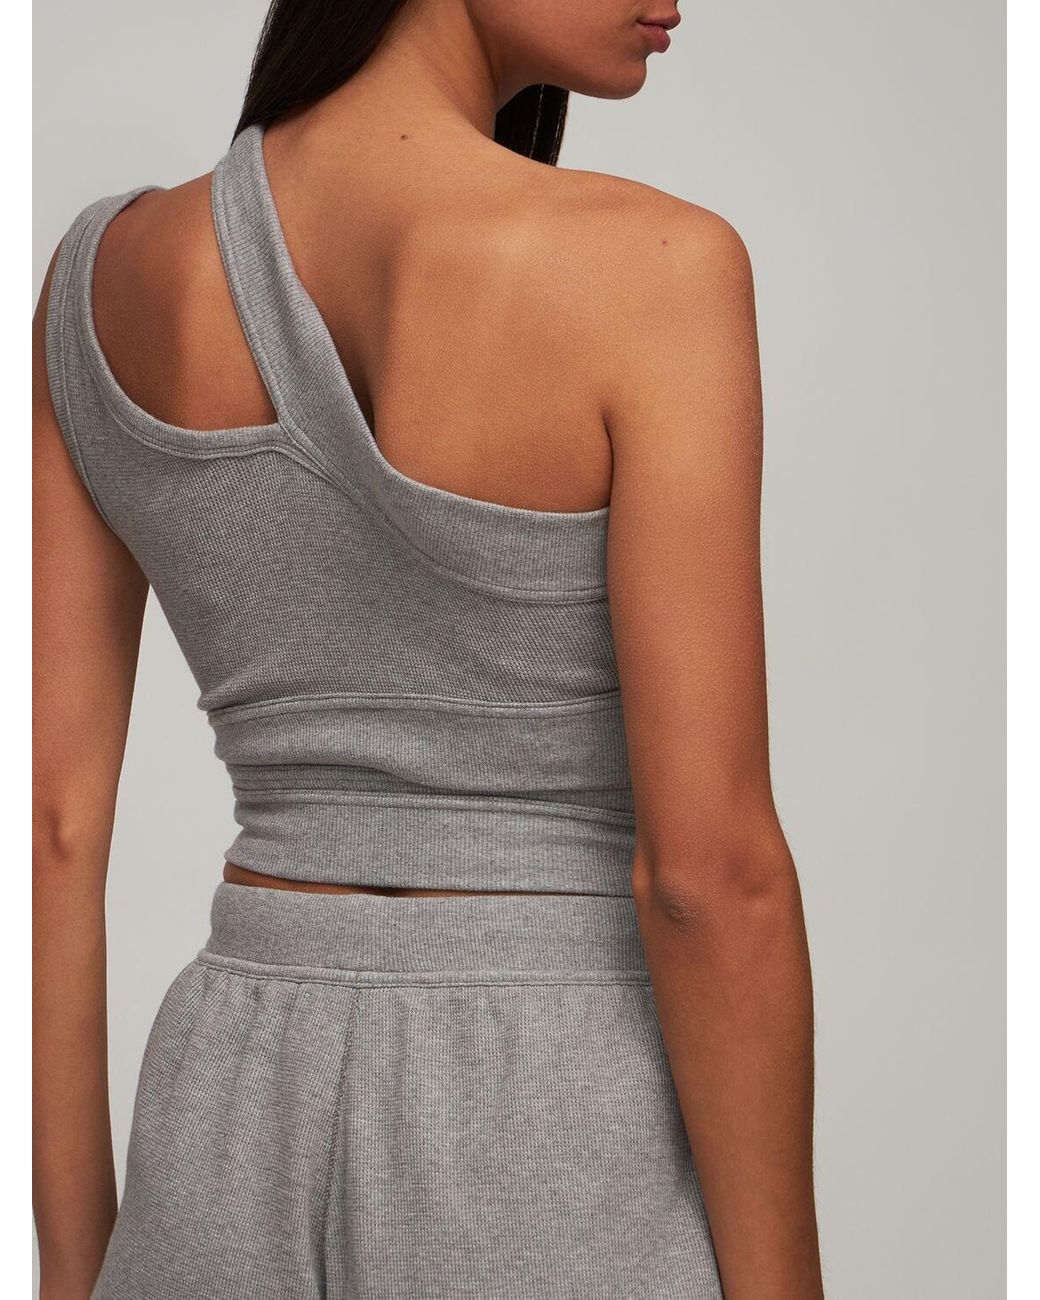 adidas Originals Blue Version Waffle Pack Wrap Bra Top in Gray | Lyst